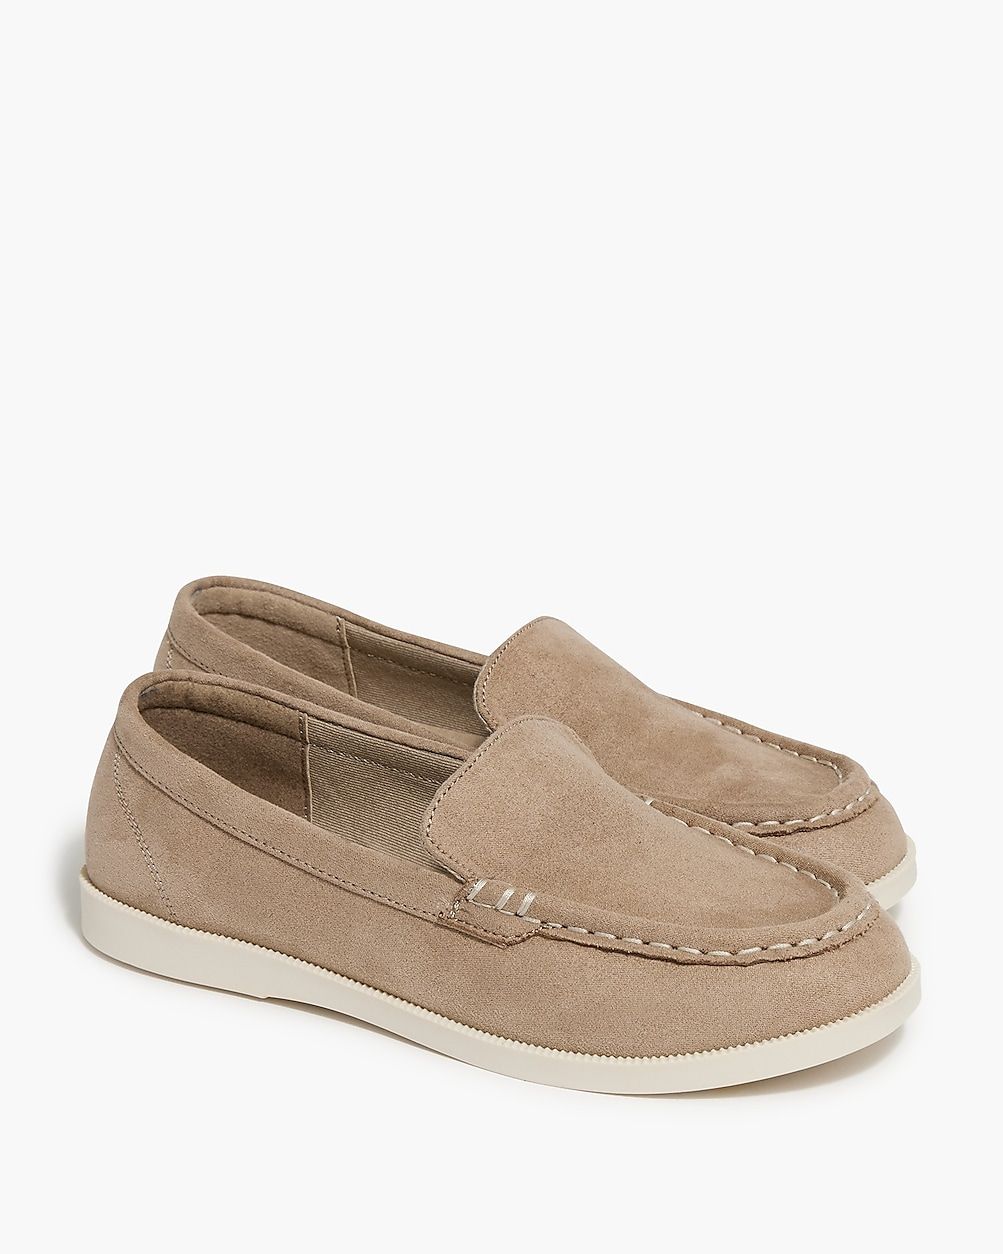 Boys' sueded loafers | J.Crew Factory